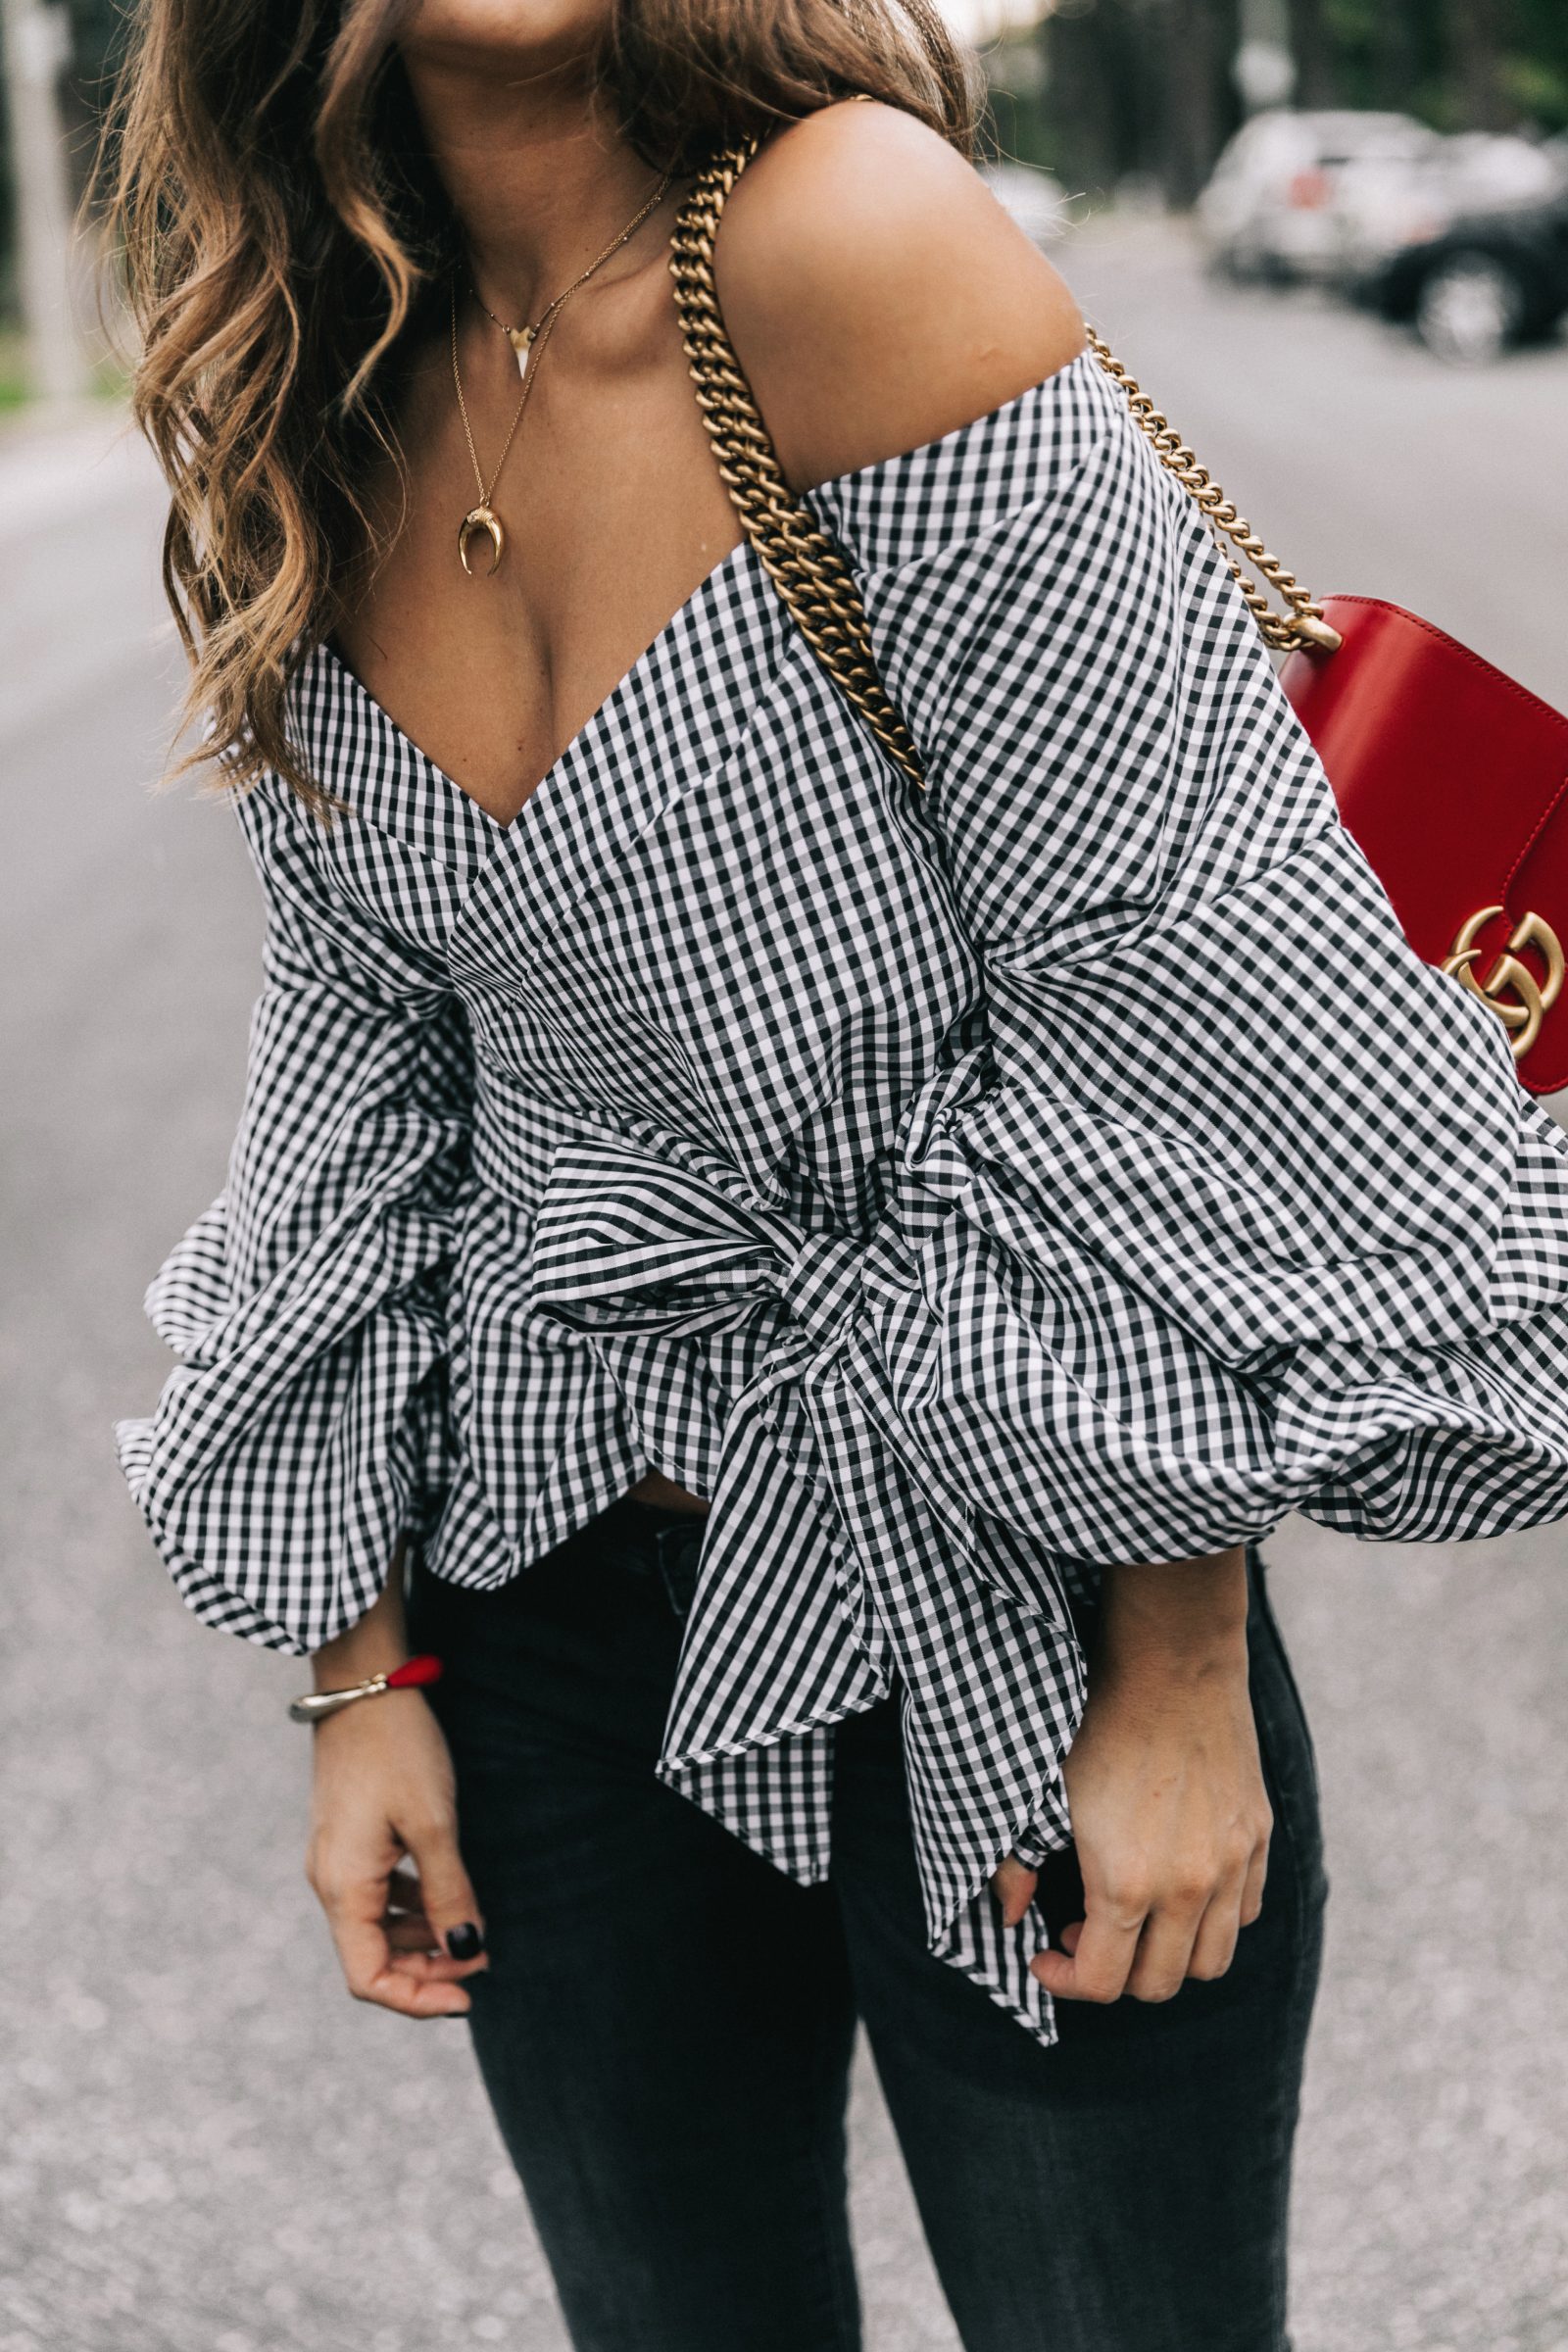 beverly_hills-off_the_shoulders_shirt-plaid-skinny_jeans-ripped_jeans-sincerely_jules_shop-gucci_bag-chicwish-outfit-street_style-los_angeles-collage_vintage-16